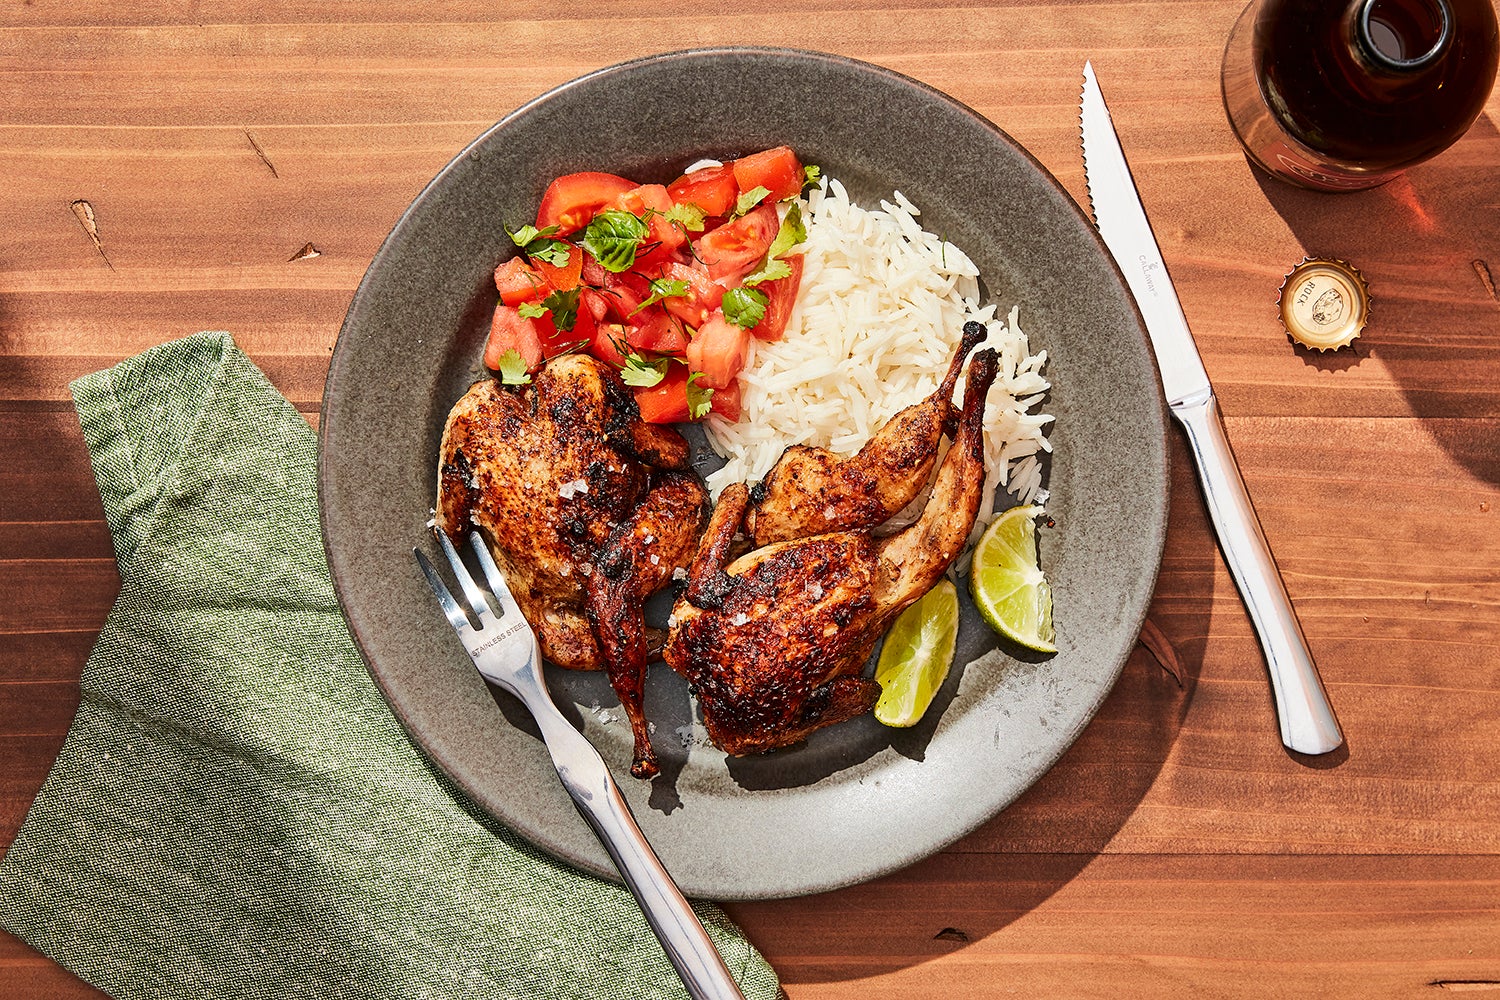 plate with cooked quail, tomato salad, and rice